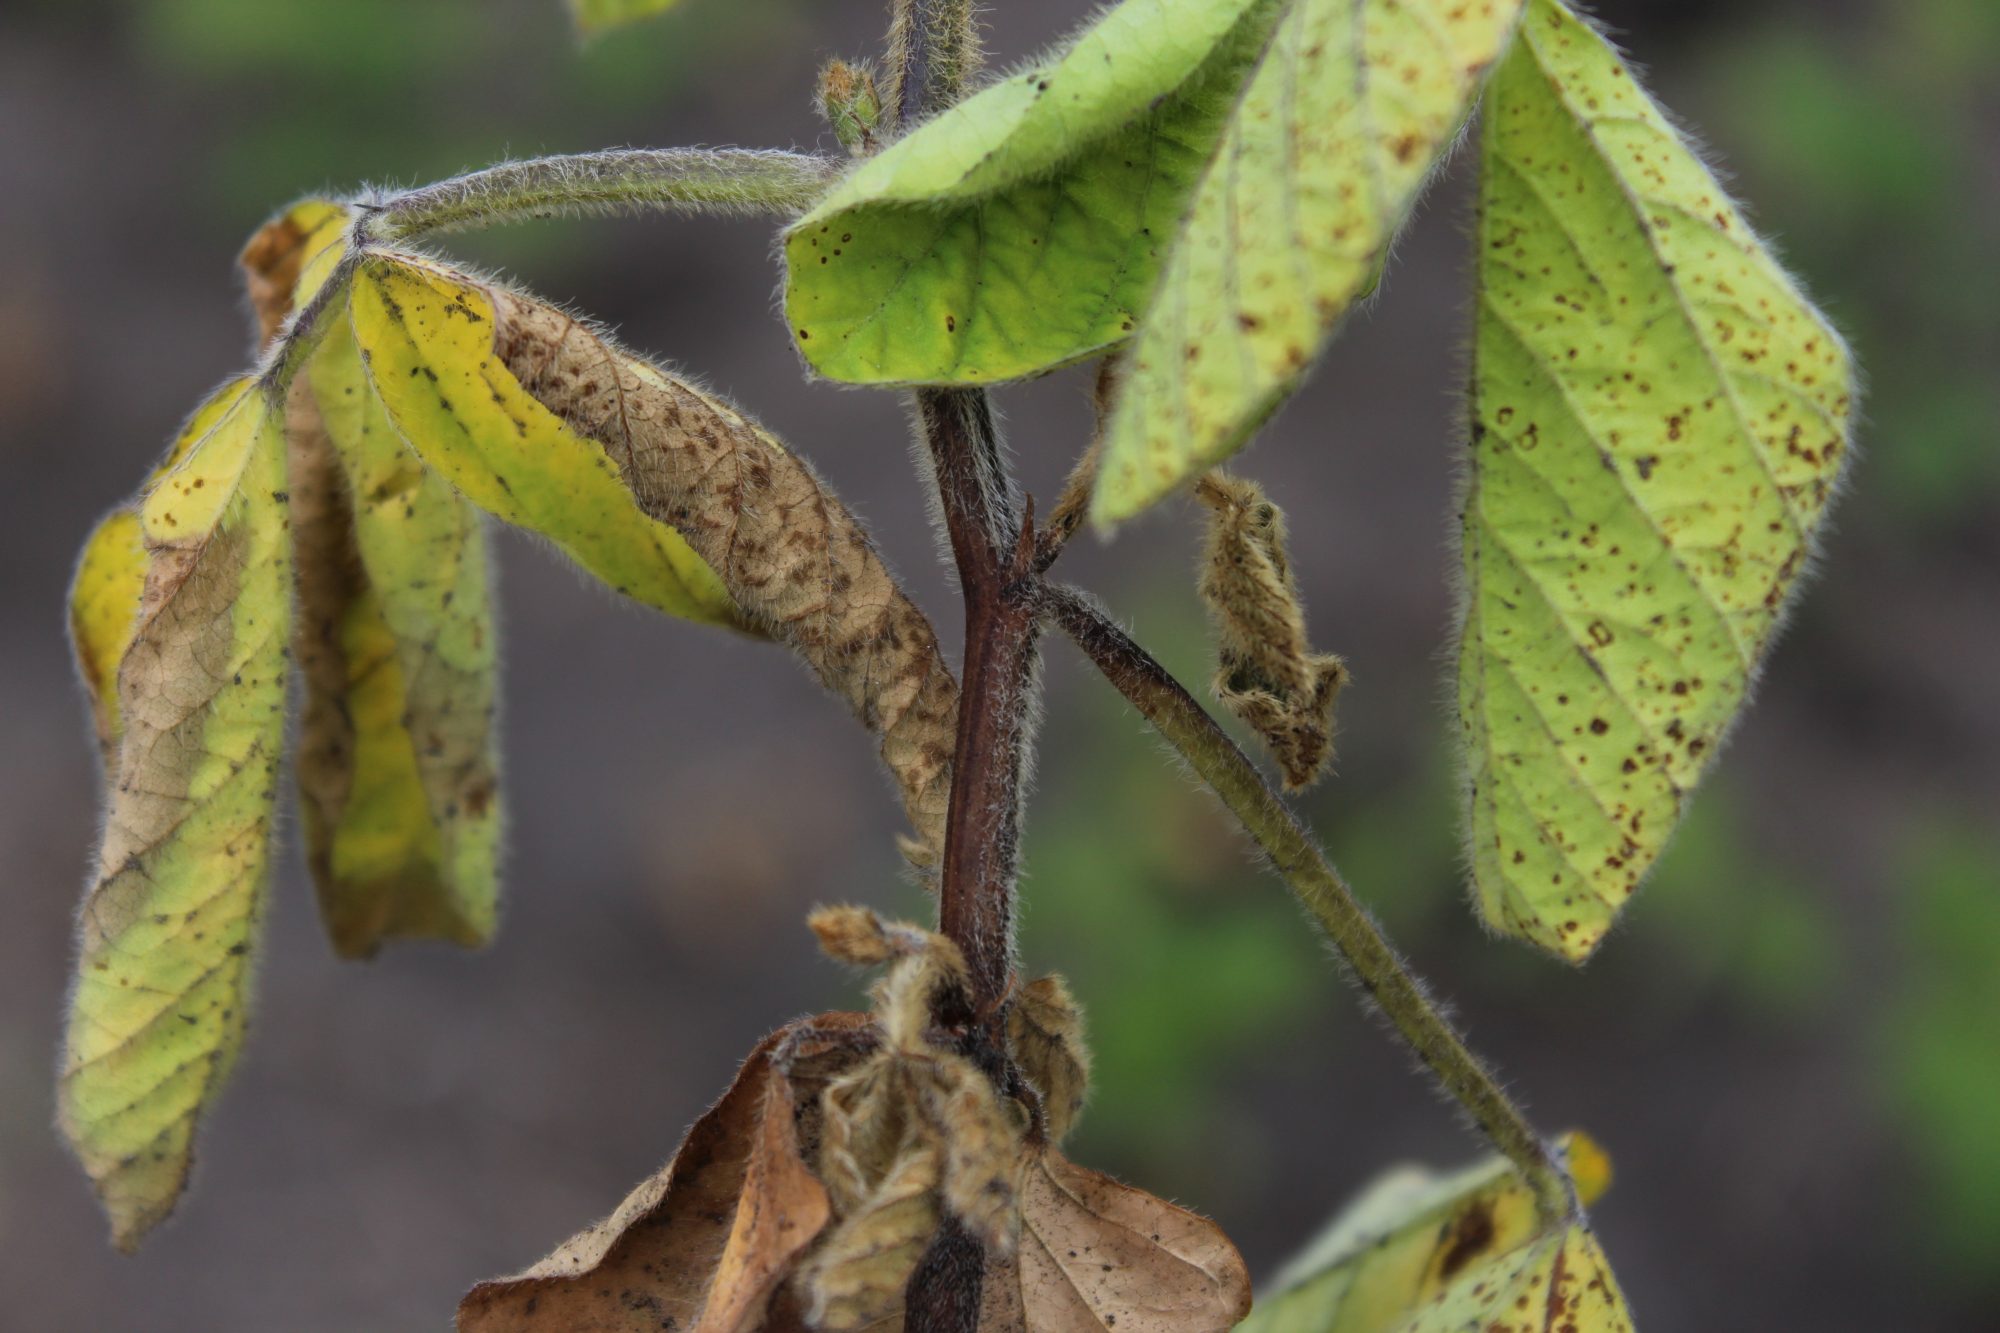 Resistance to Phytophthora Root and Stem Rot in Soybean